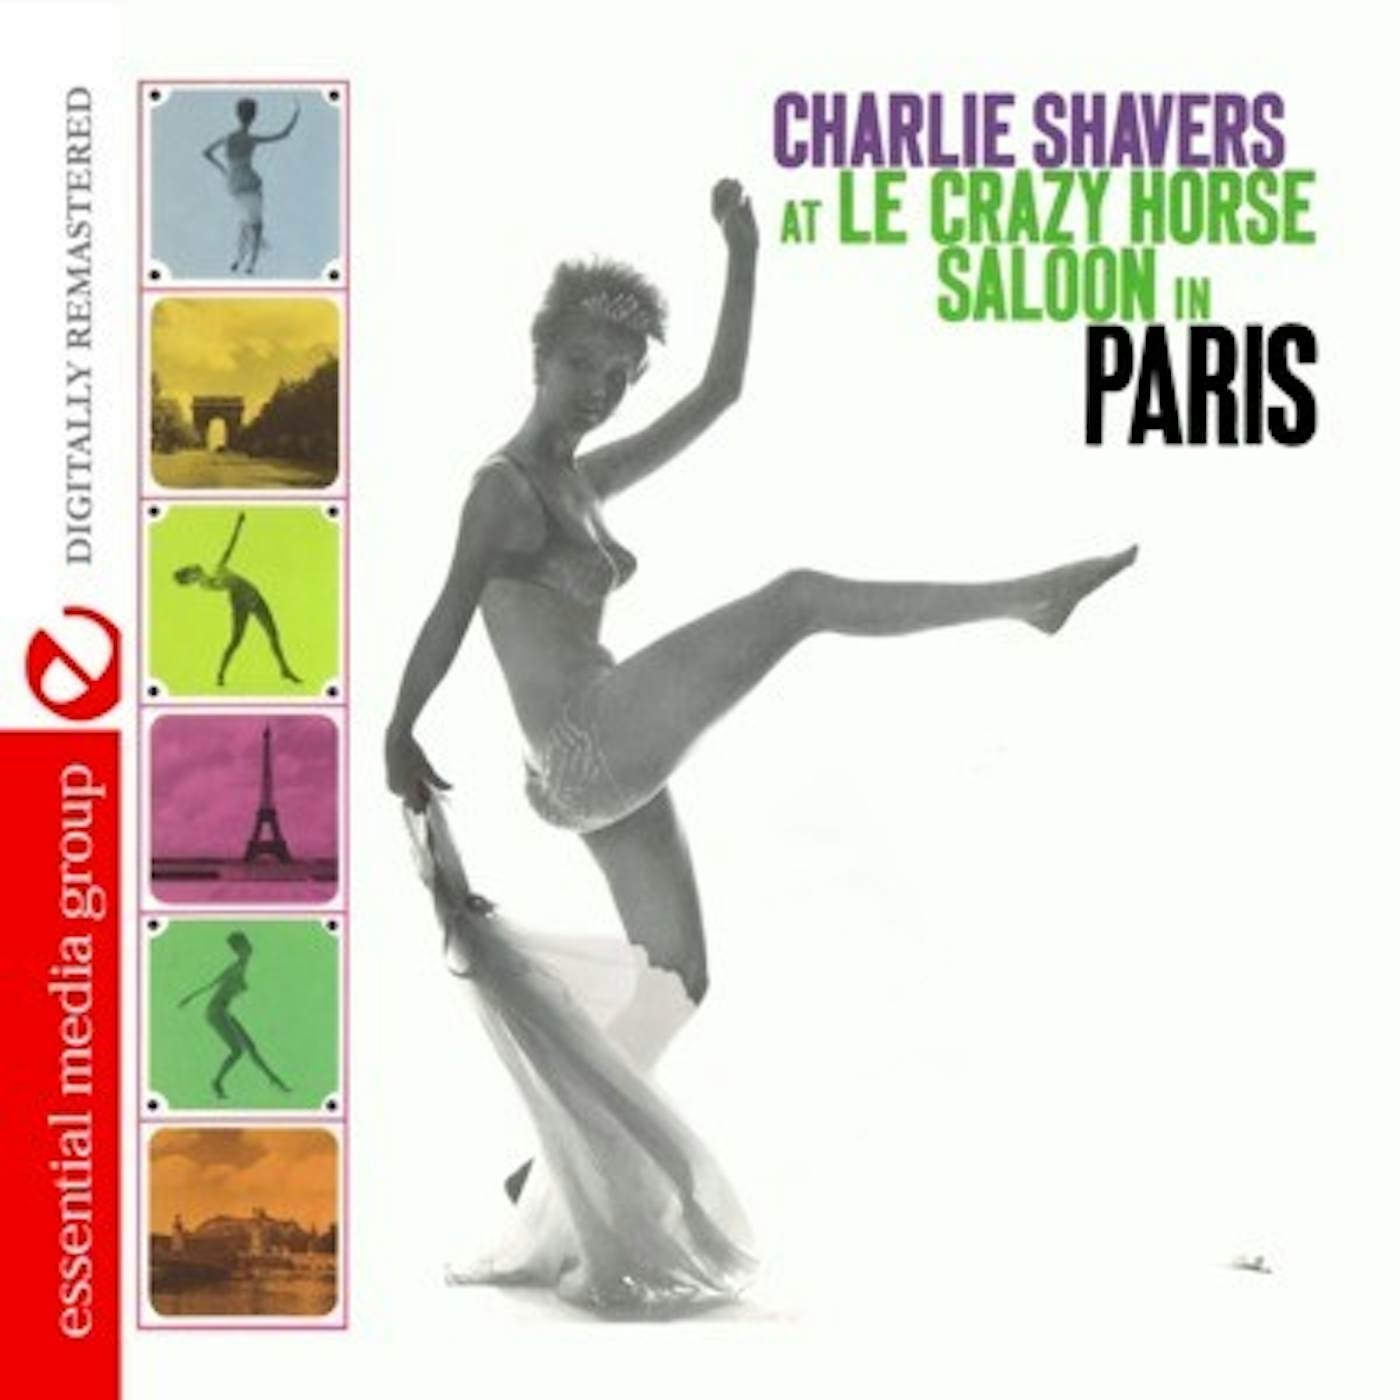 Charlie Shavers AT LE CRAZY HORSE SALOON IN PARIS CD